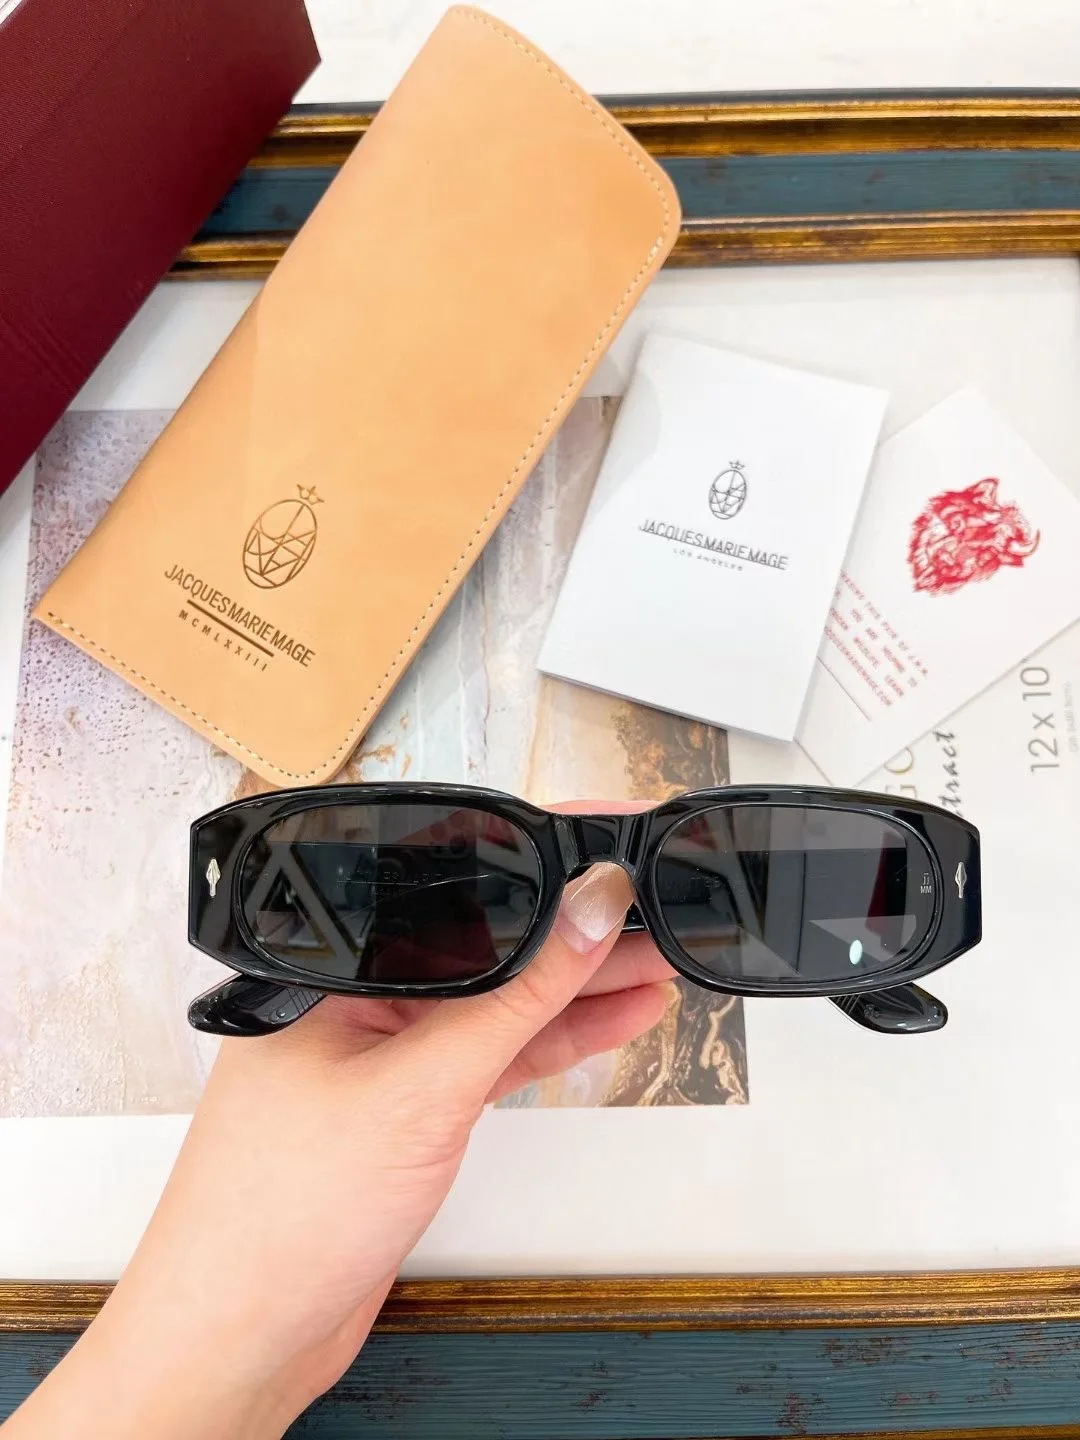 JACQUES MARIE MAGE Thick Acetate Women Men UV400 Protection Vintage Retro Classcial Sunglasses with Case Oculos HULYA